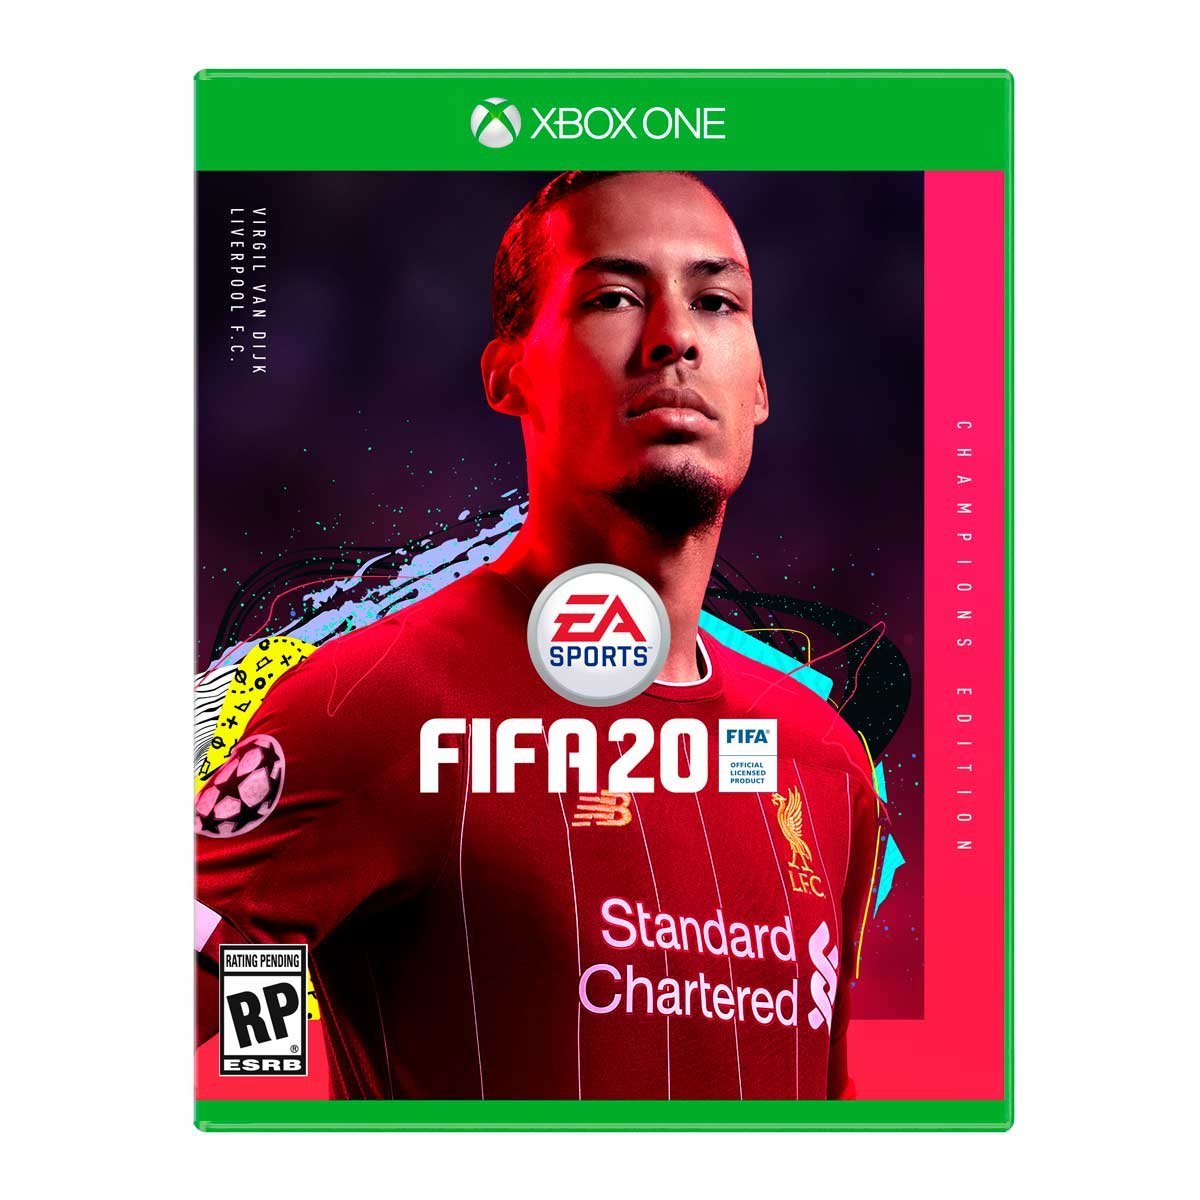 Xbox One Fifa 20 Deluxe Edition